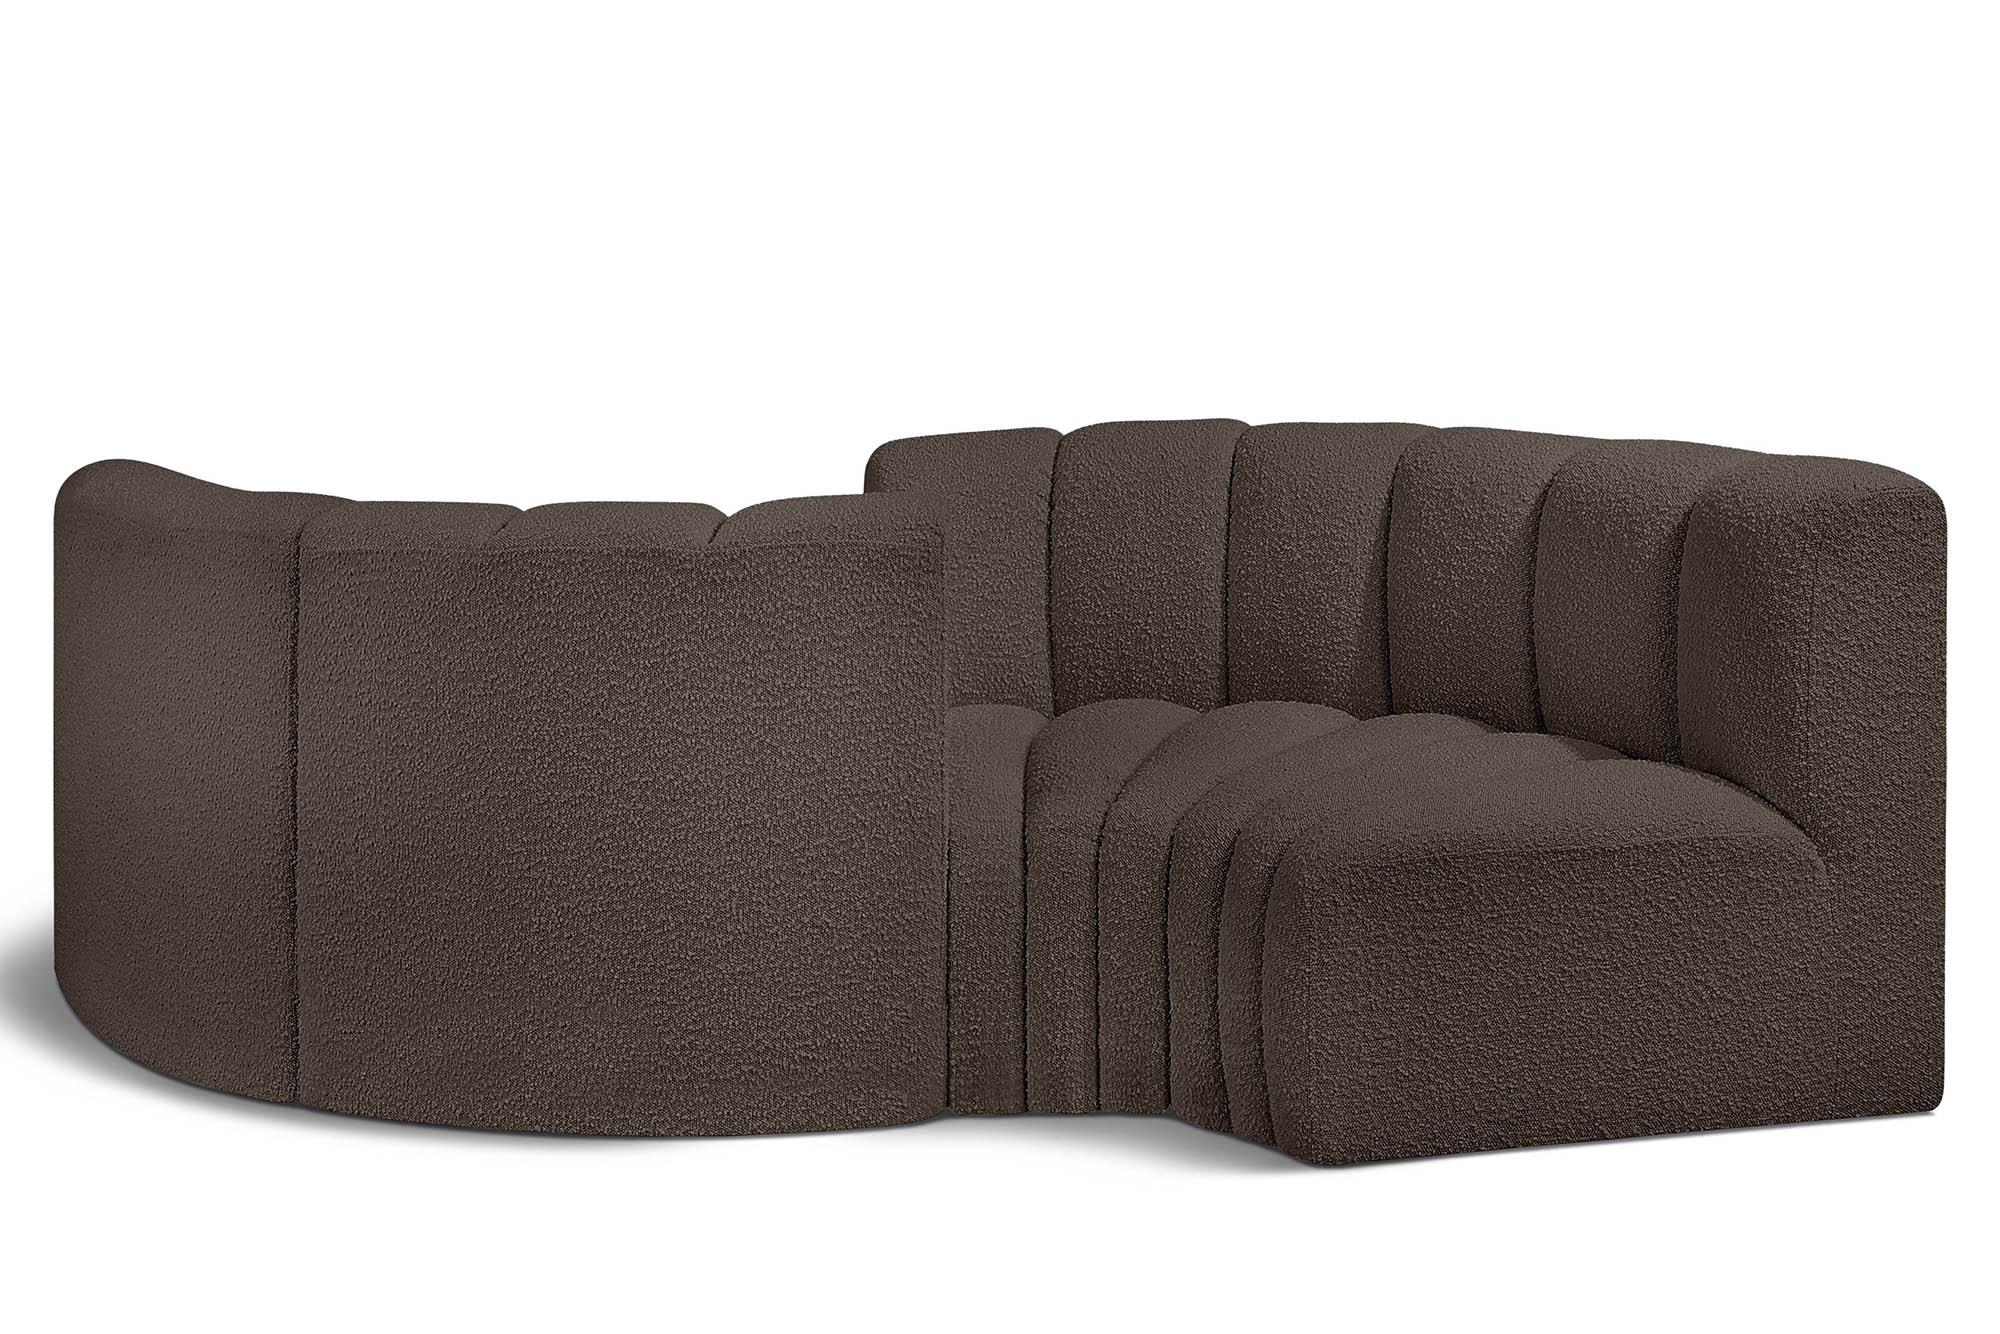 Contemporary, Modern Modular Sectional Sofa ARC 102Brown-S4F 102Brown-S4F in Brown 